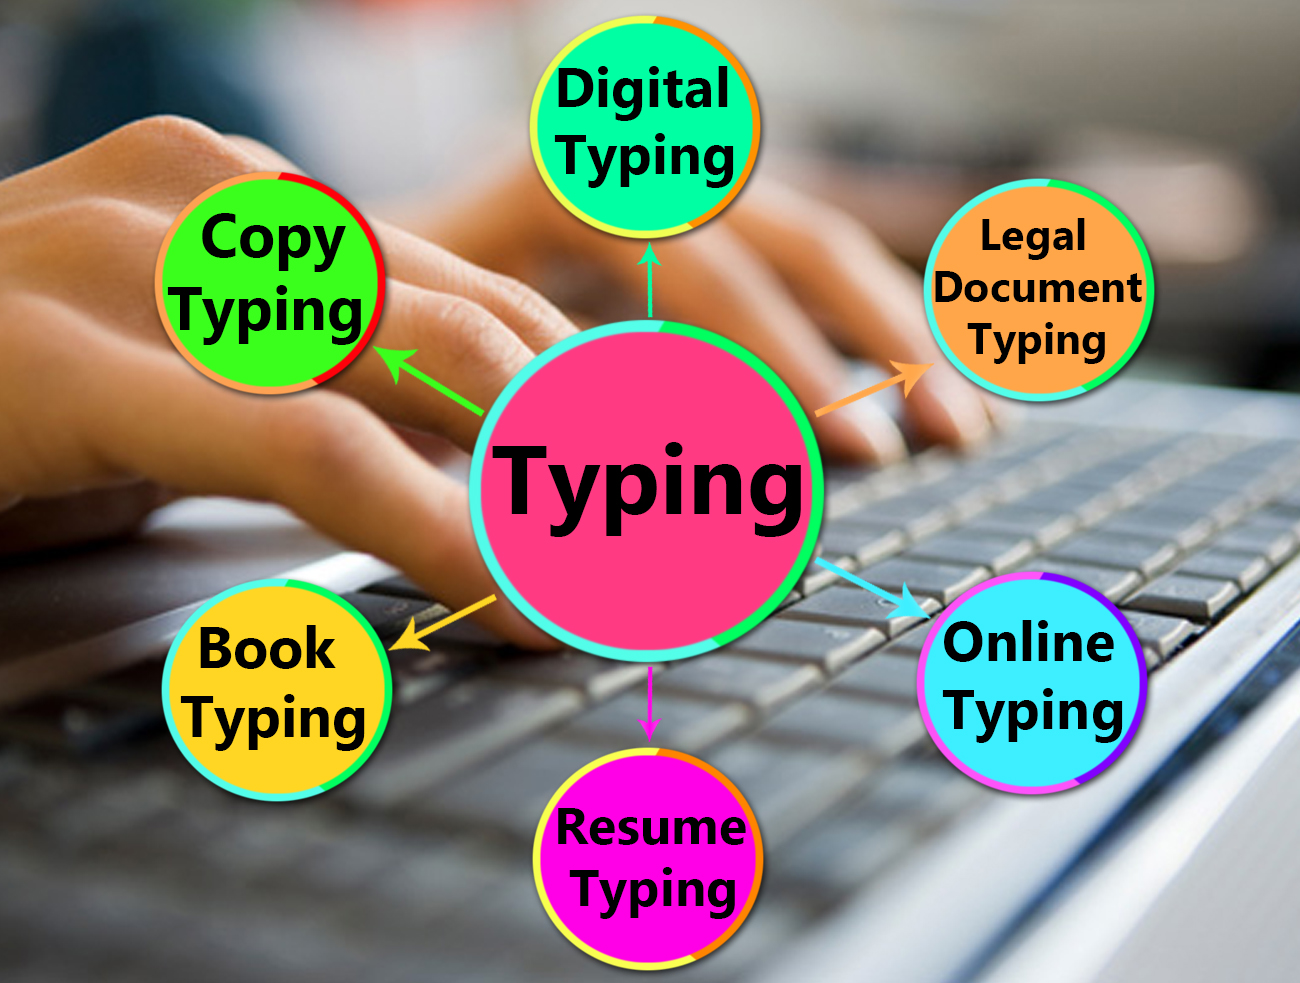 Typing Service